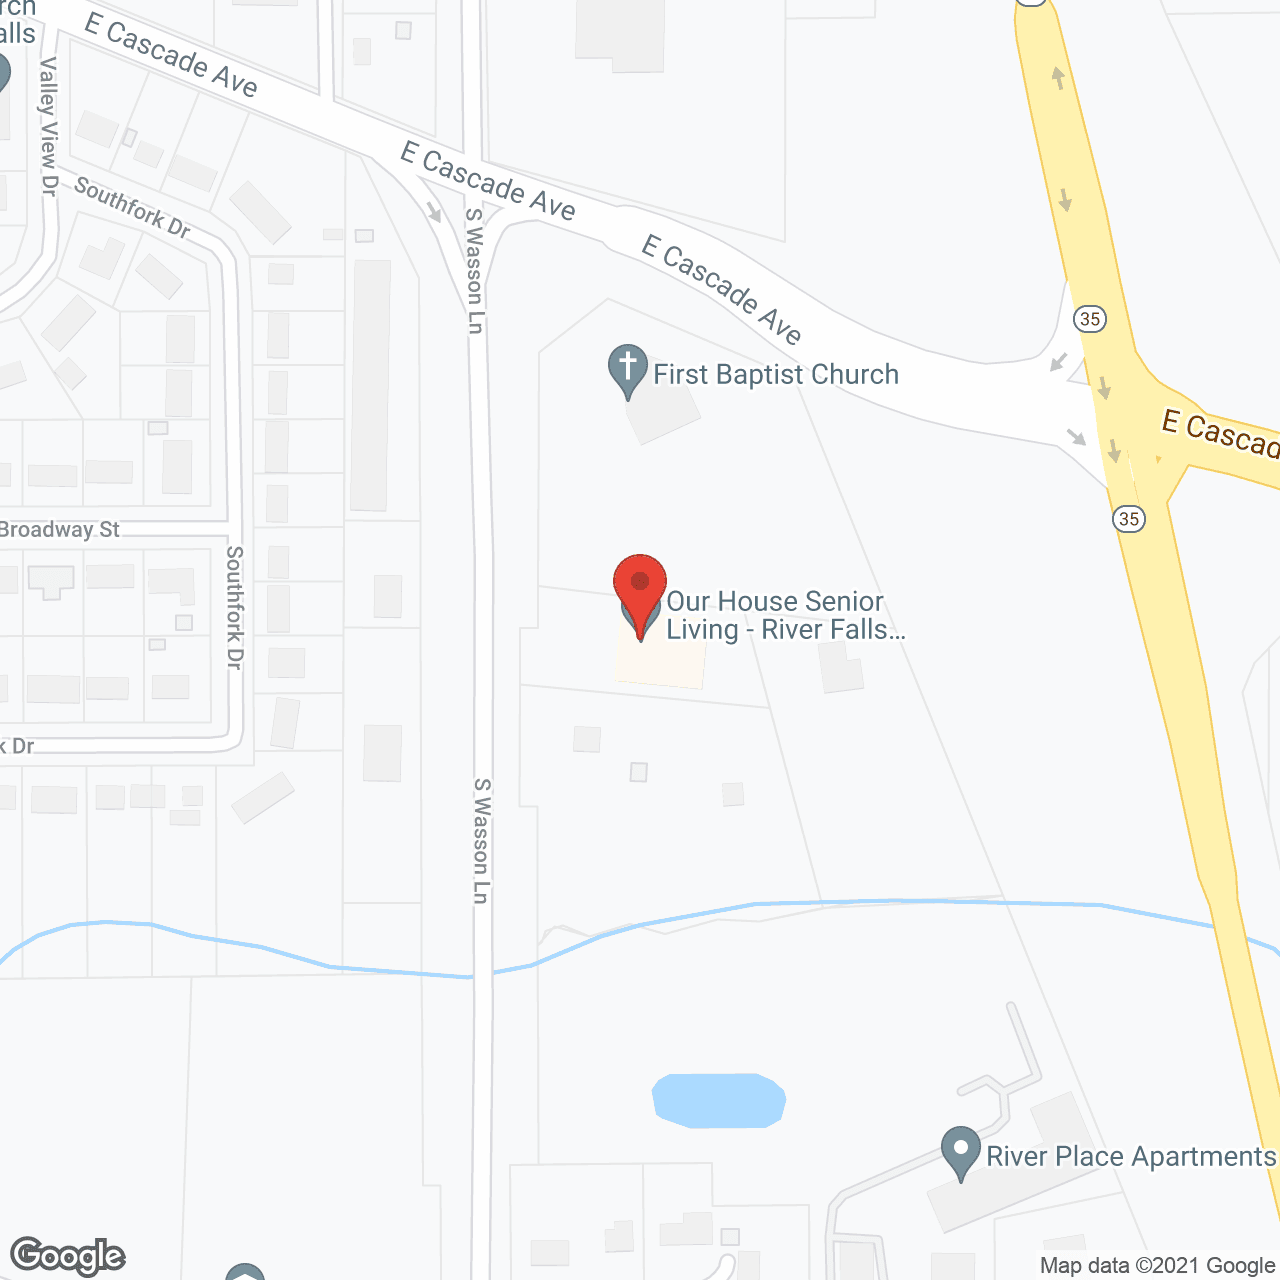 Our House Senior Living Memory Care - River Falls in google map